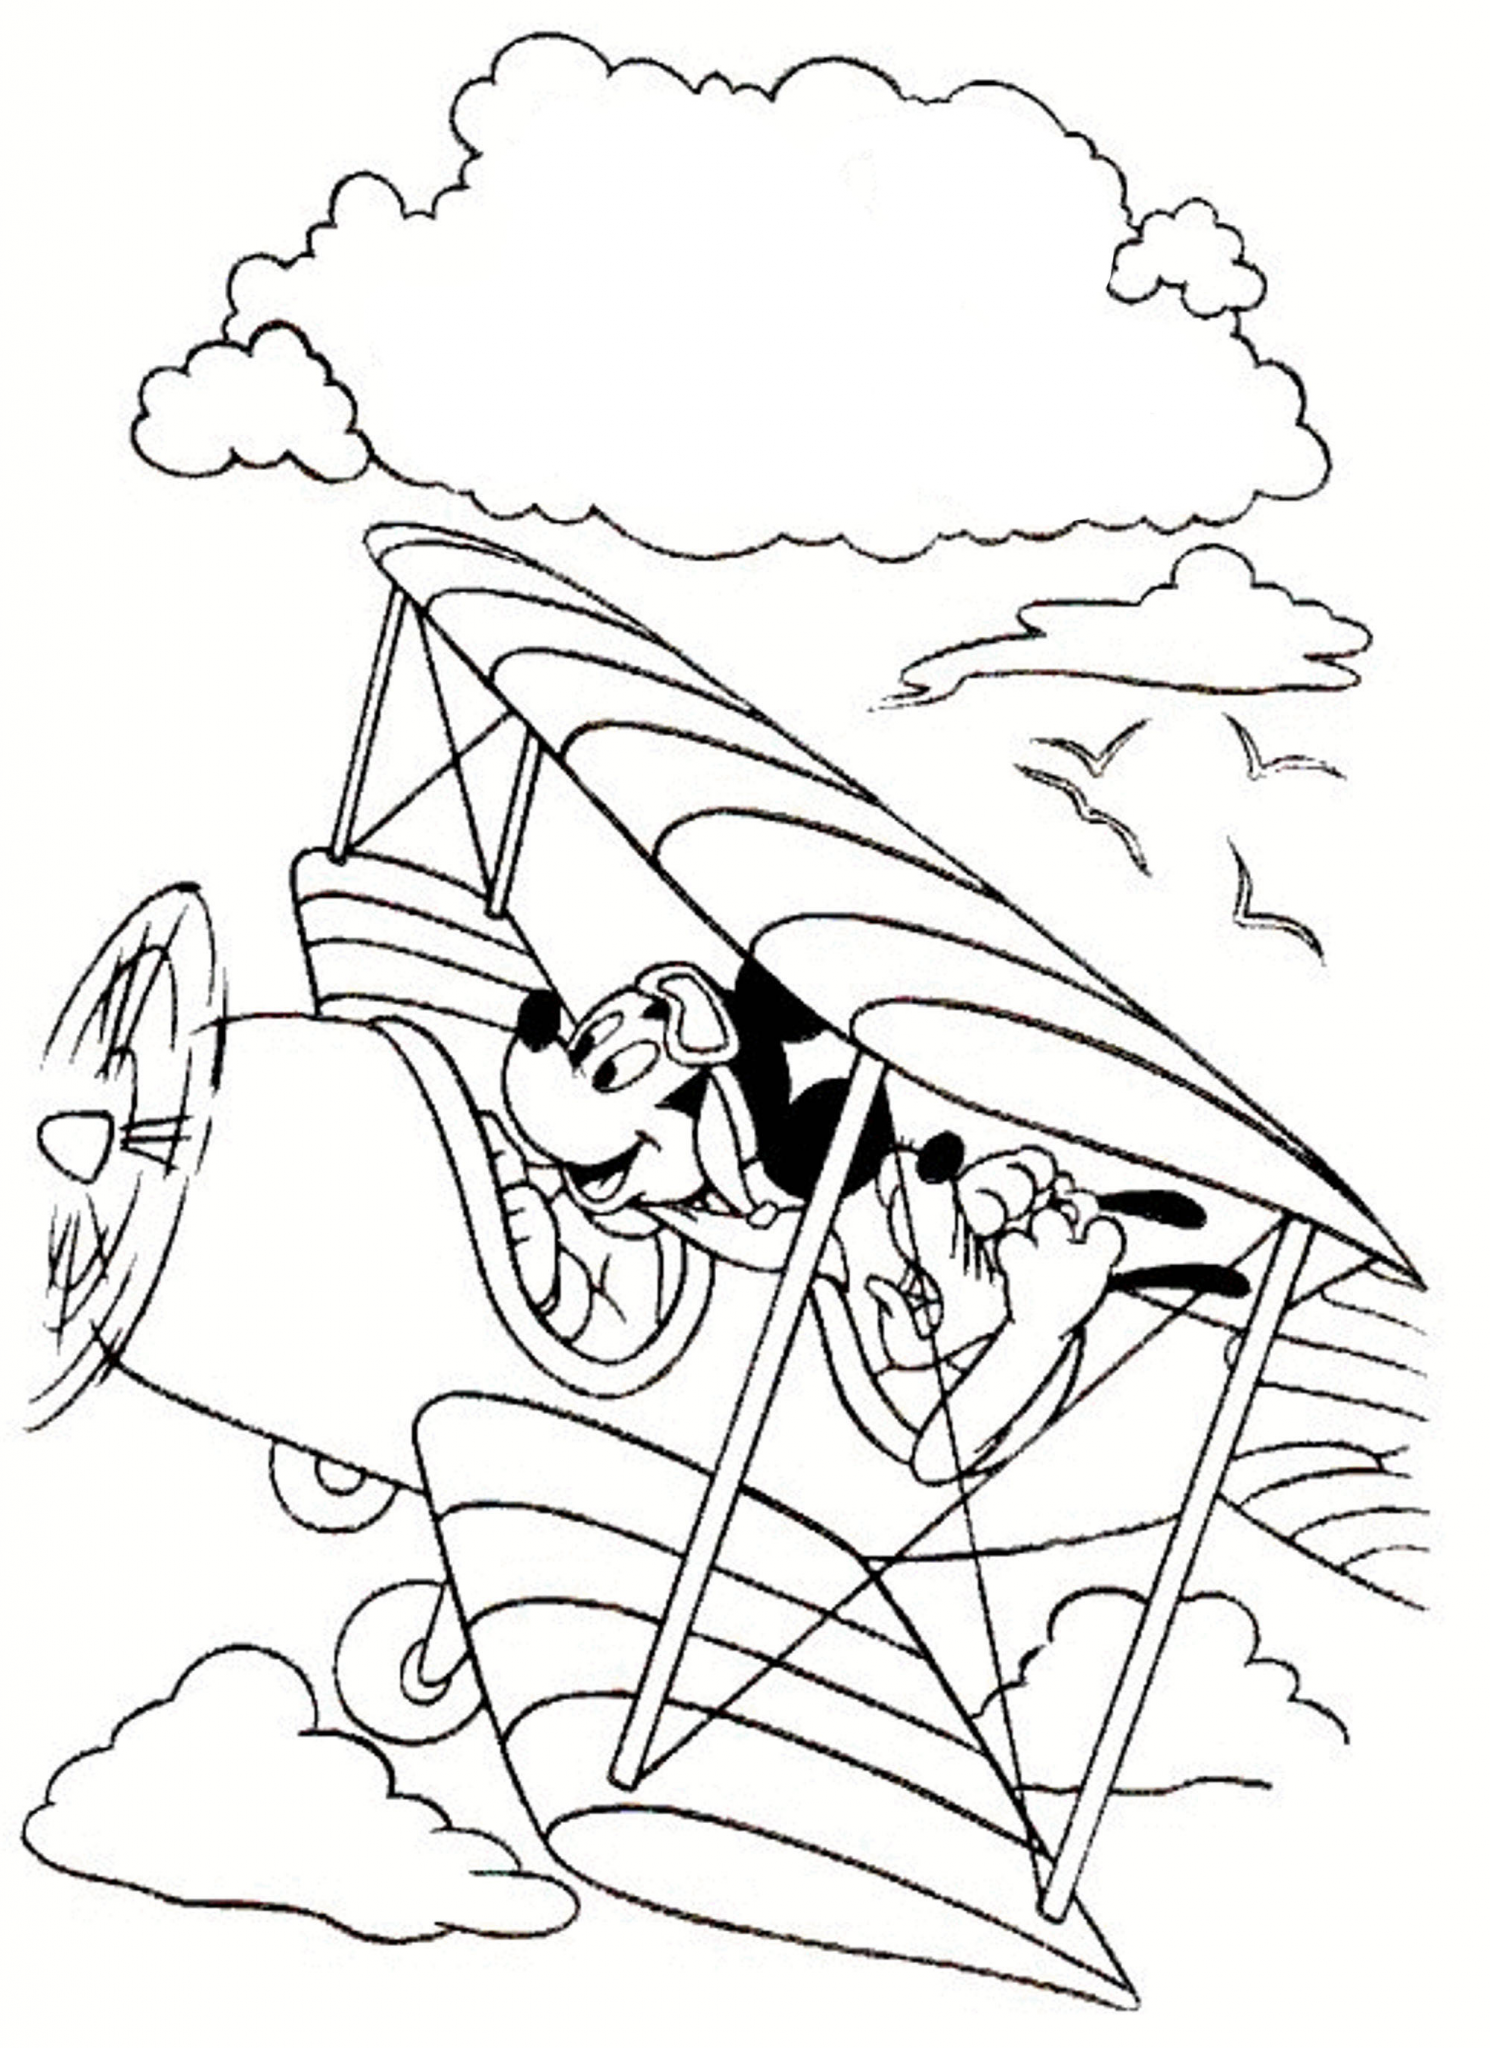 Download airplane-printable-coloring-pages | | BestAppsForKids.com